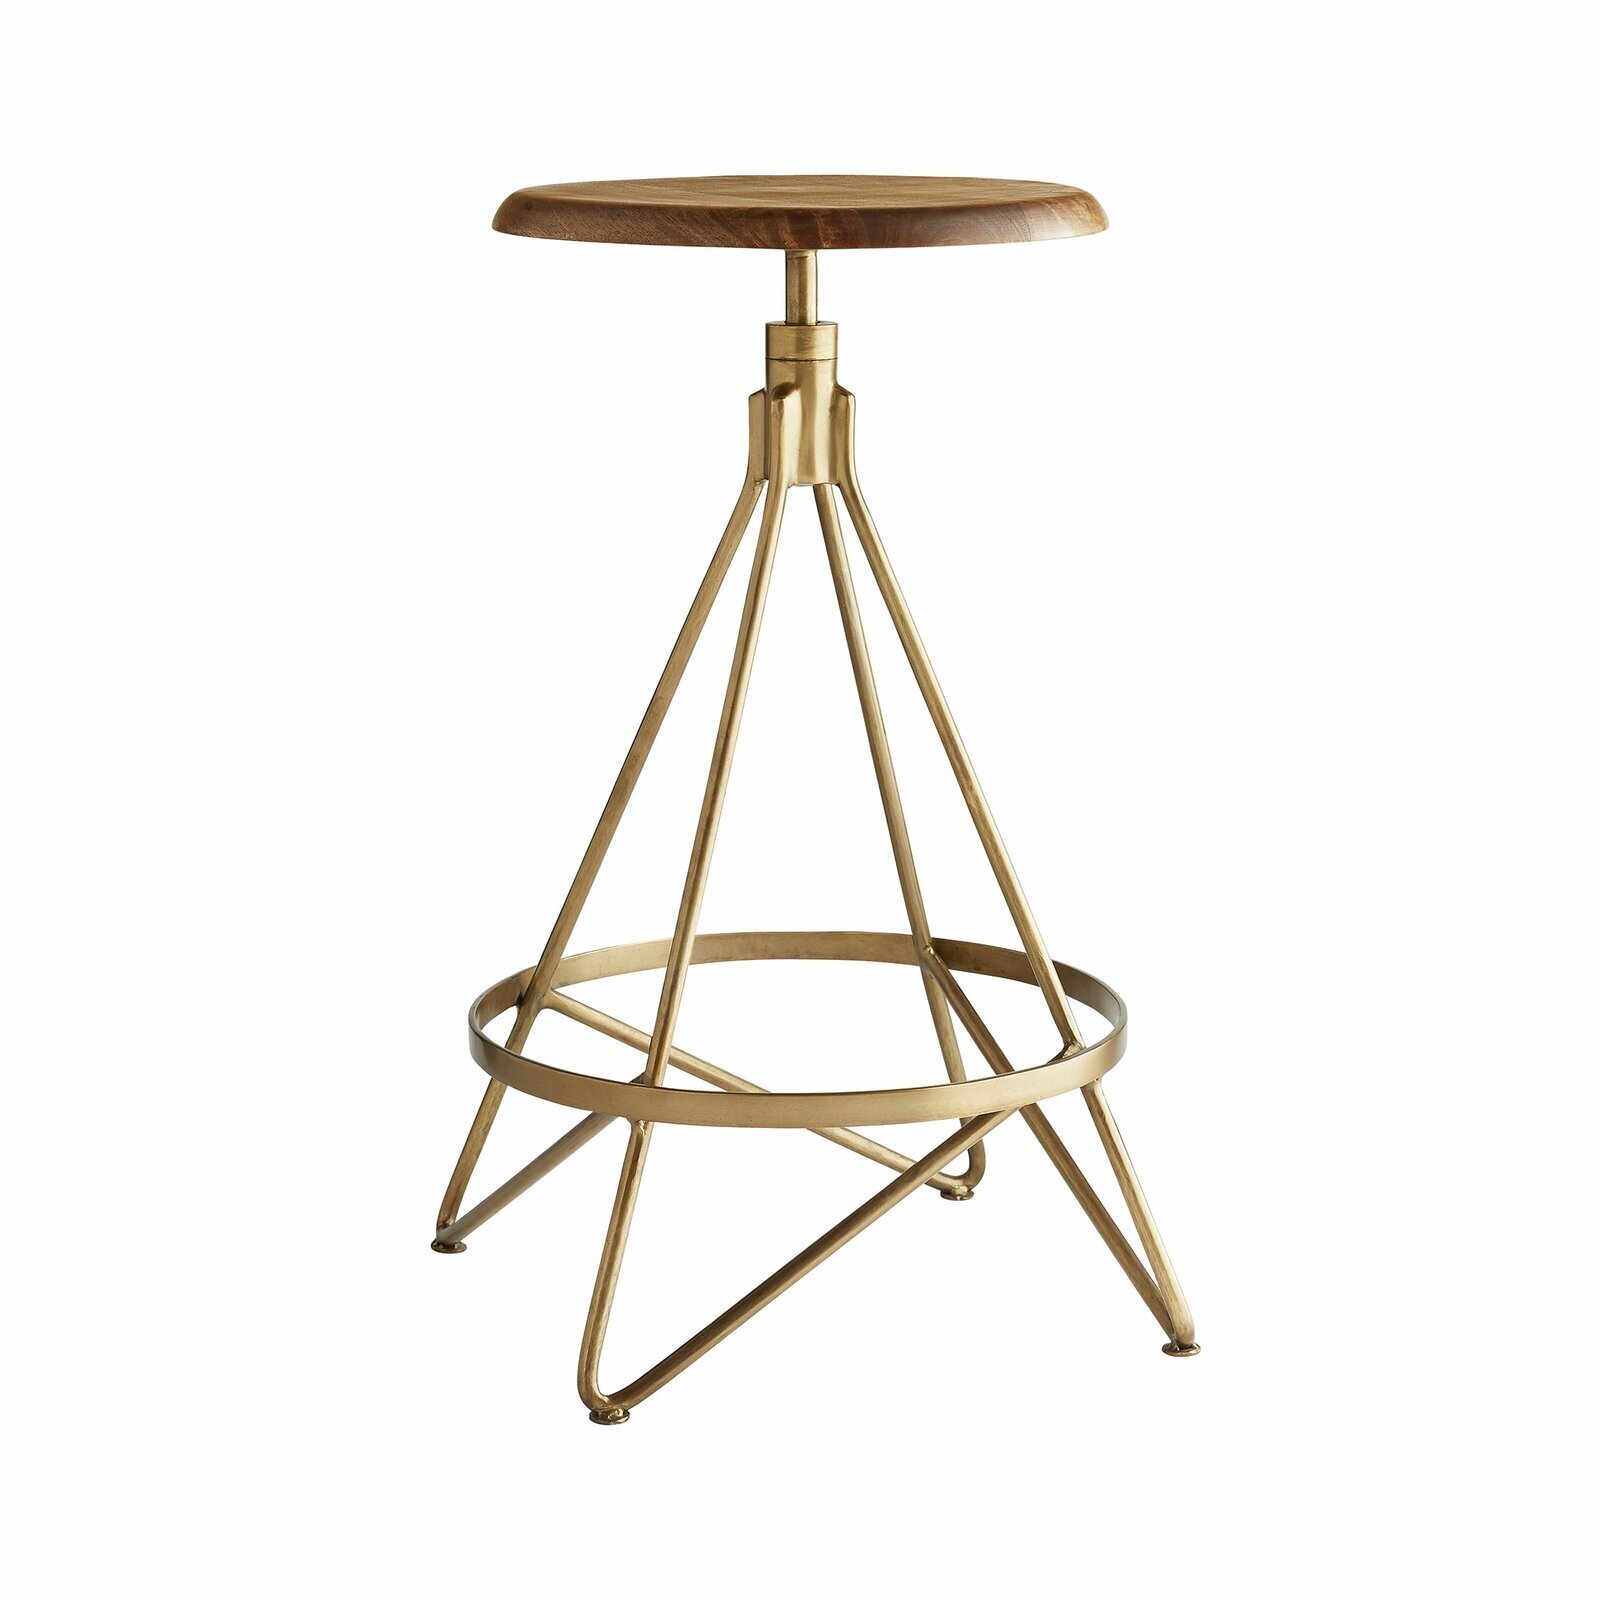 Adjustable Brass Stool With Wooden Seat